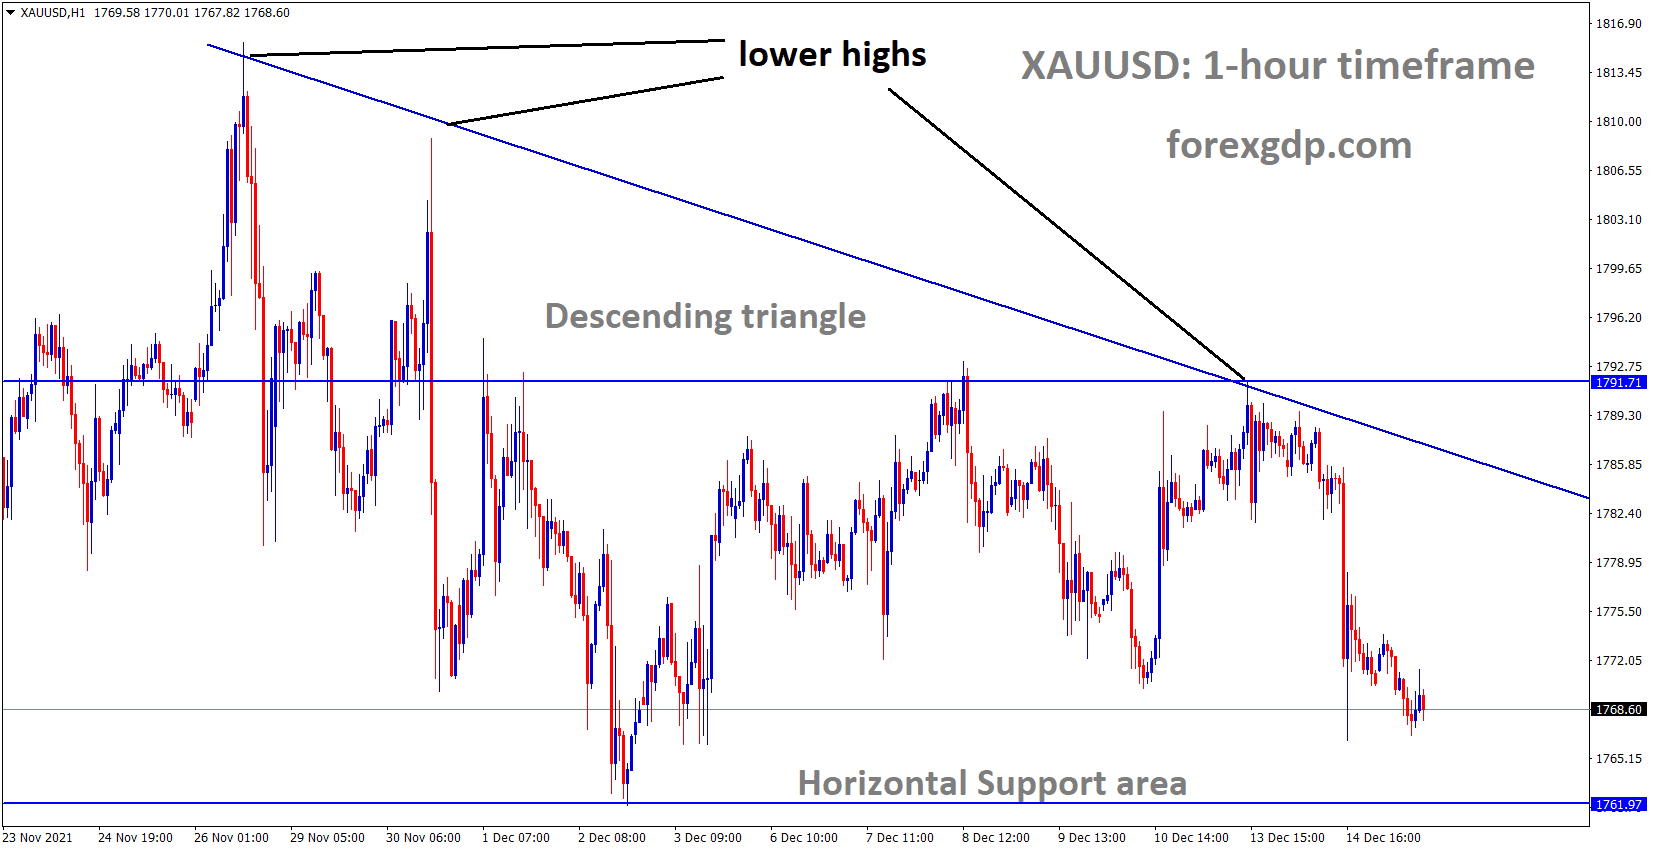 XAUUSD Gold price is moving in the Box Pattern Descending triangle pattern